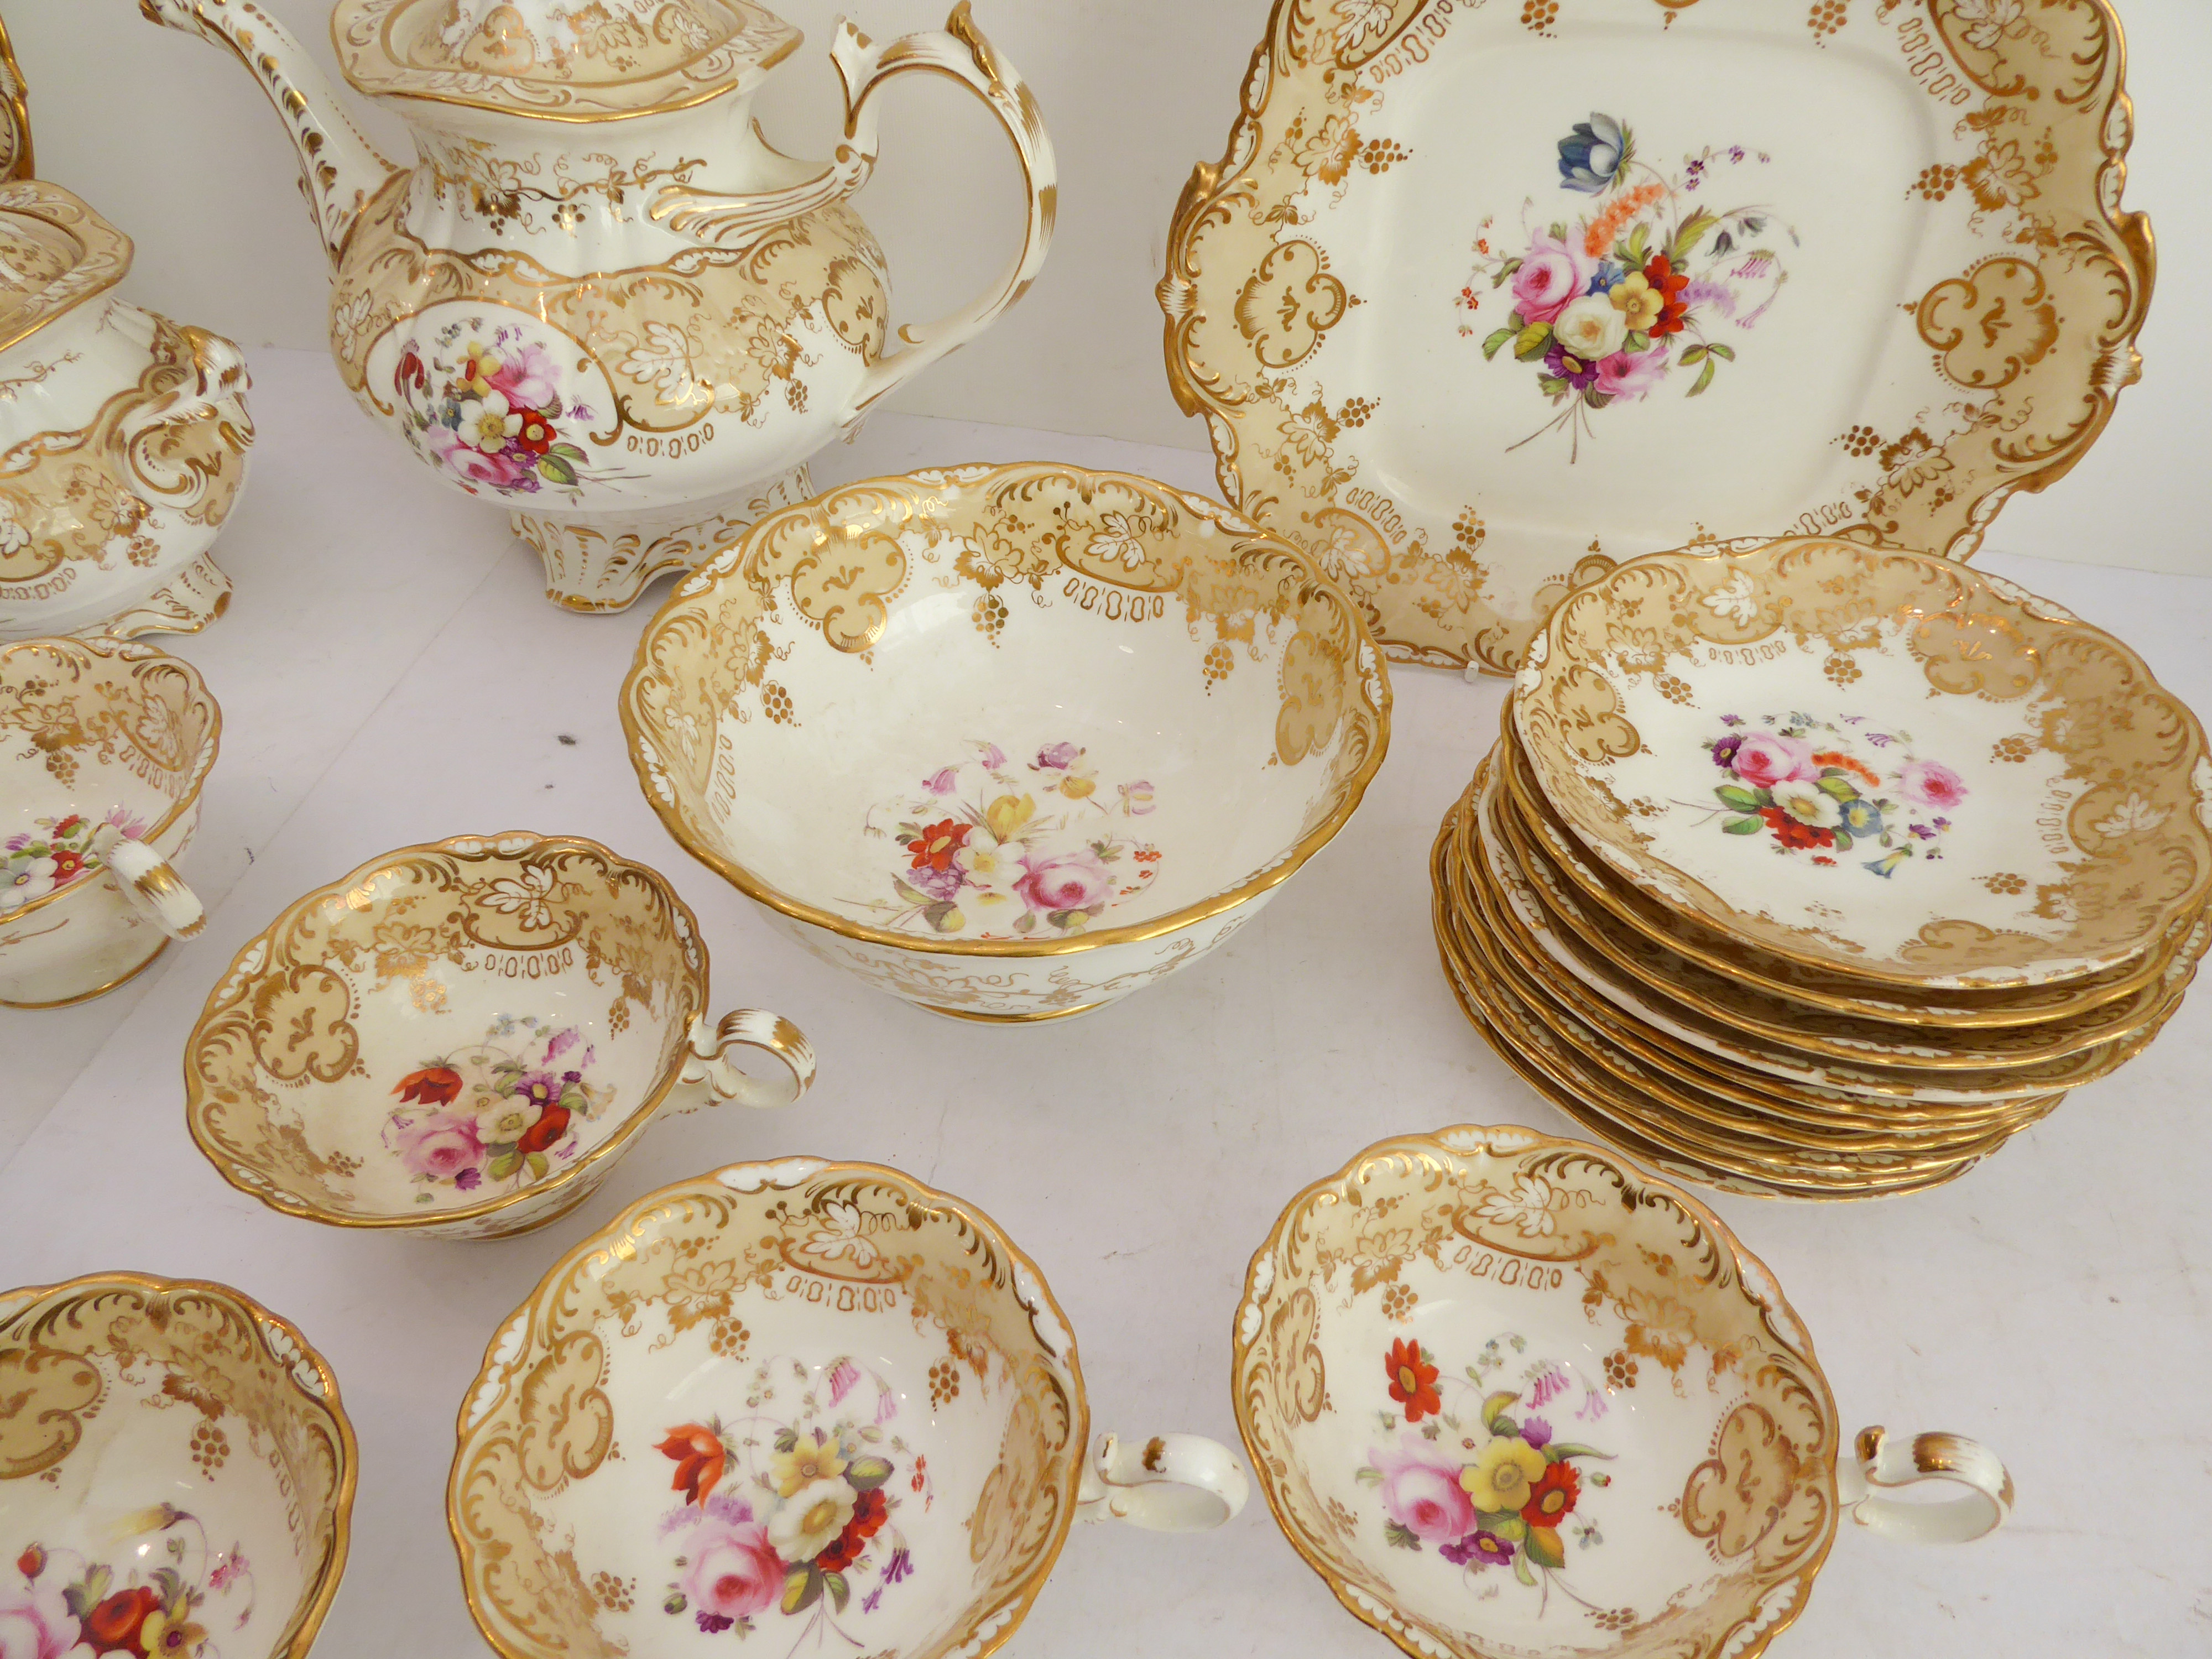 A 19th century ceramic tea service hand-gilded and decorated in enamels with various floral sprays - Image 2 of 3